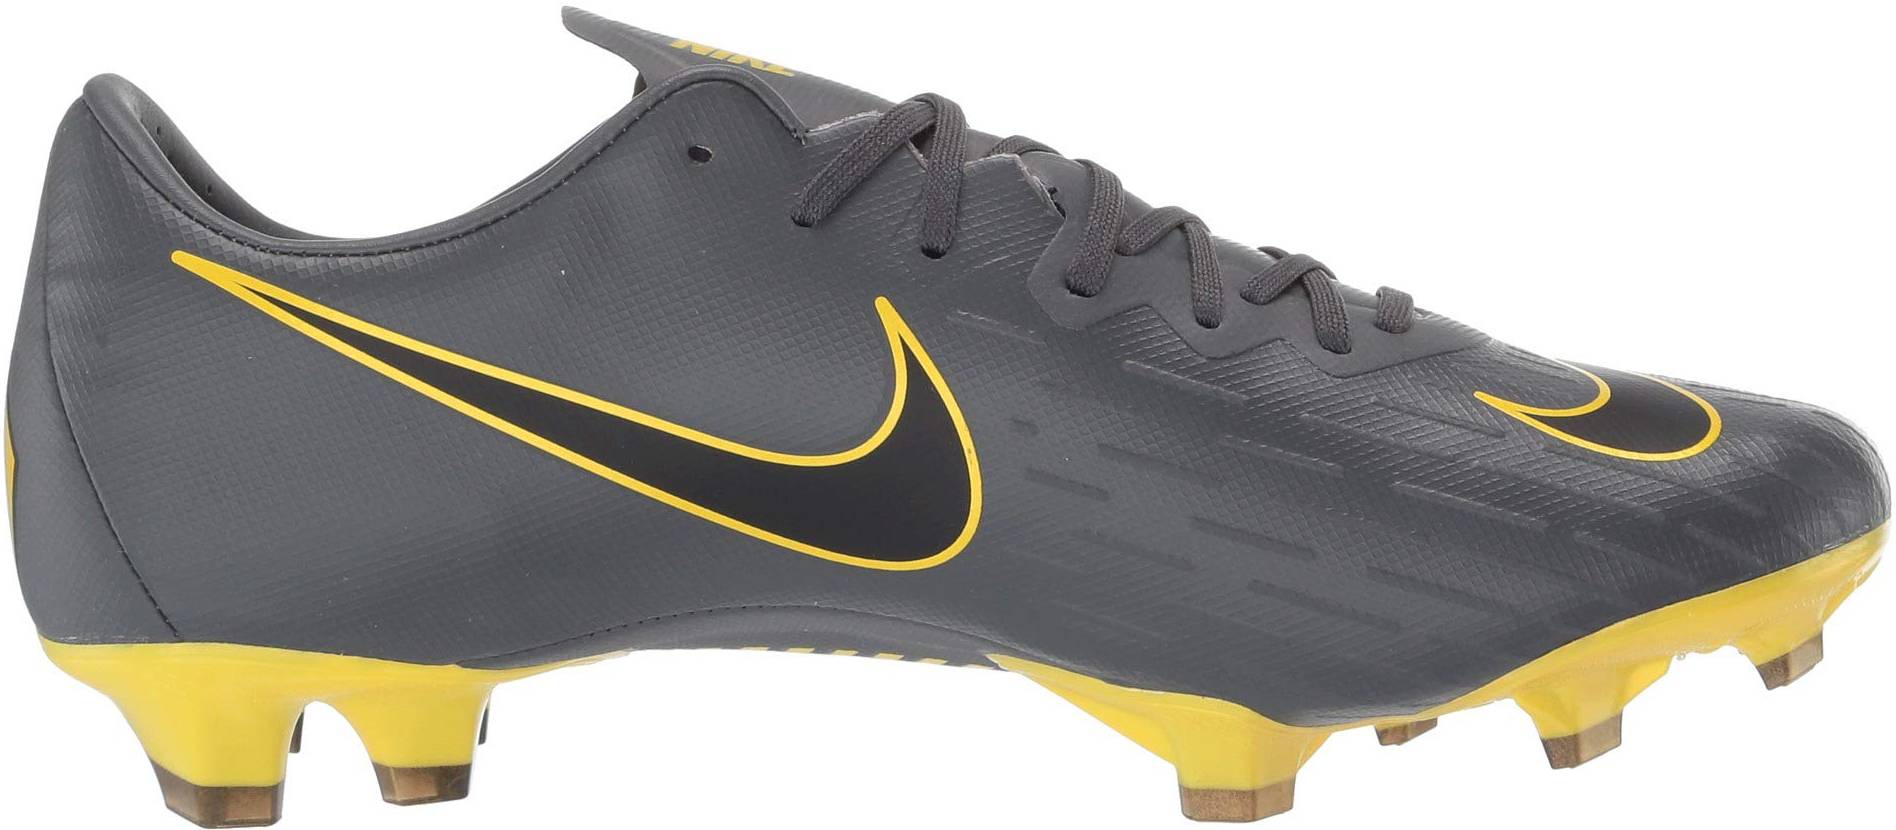 Save 63% on Soccer Cleats (492 Models 